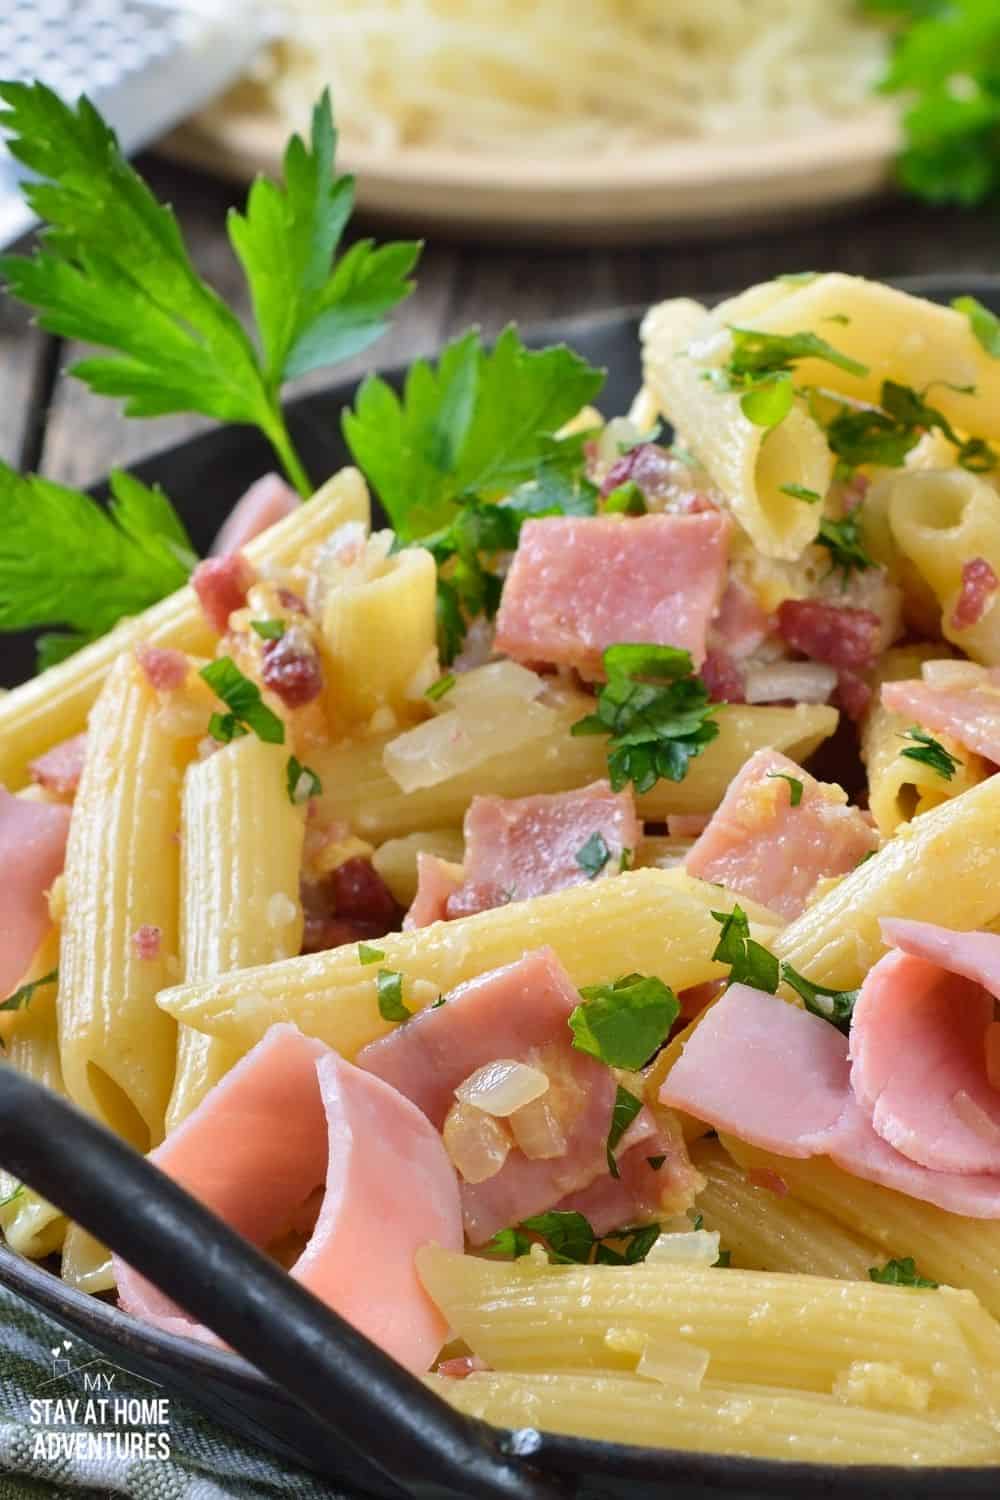 You don't need to be a chef to make these amazing ham dinner ideas. These recipes are easy and delicious, perfect for any night of the week! Tonight can be your best night ever with just one click away from your favorite recipe. via @mystayathome